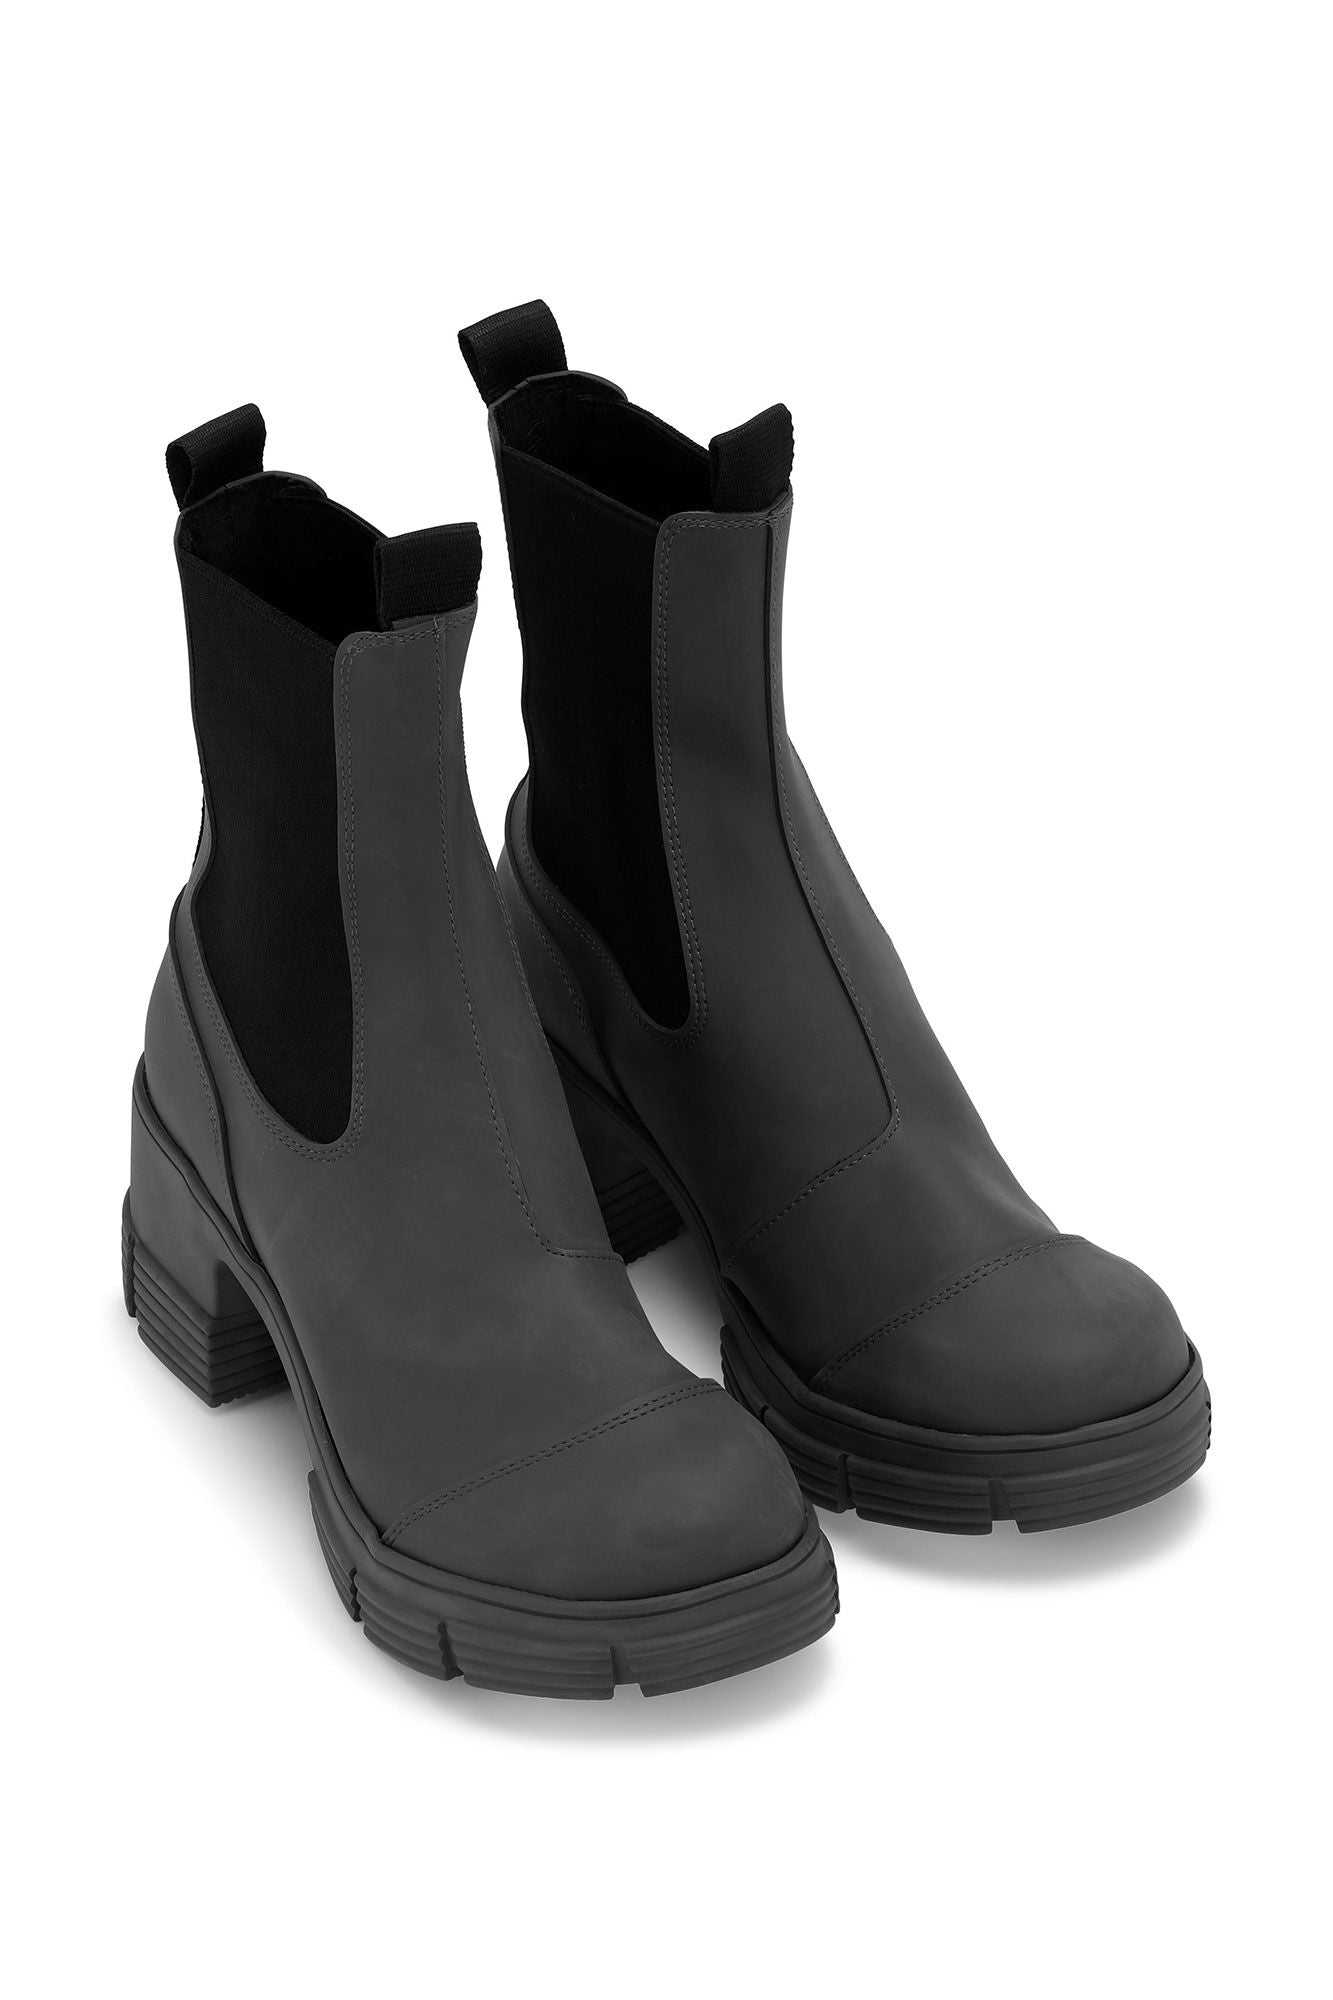 Recycled Rubber Heeled City Boot - Ganni - Danali - S2023-099-36